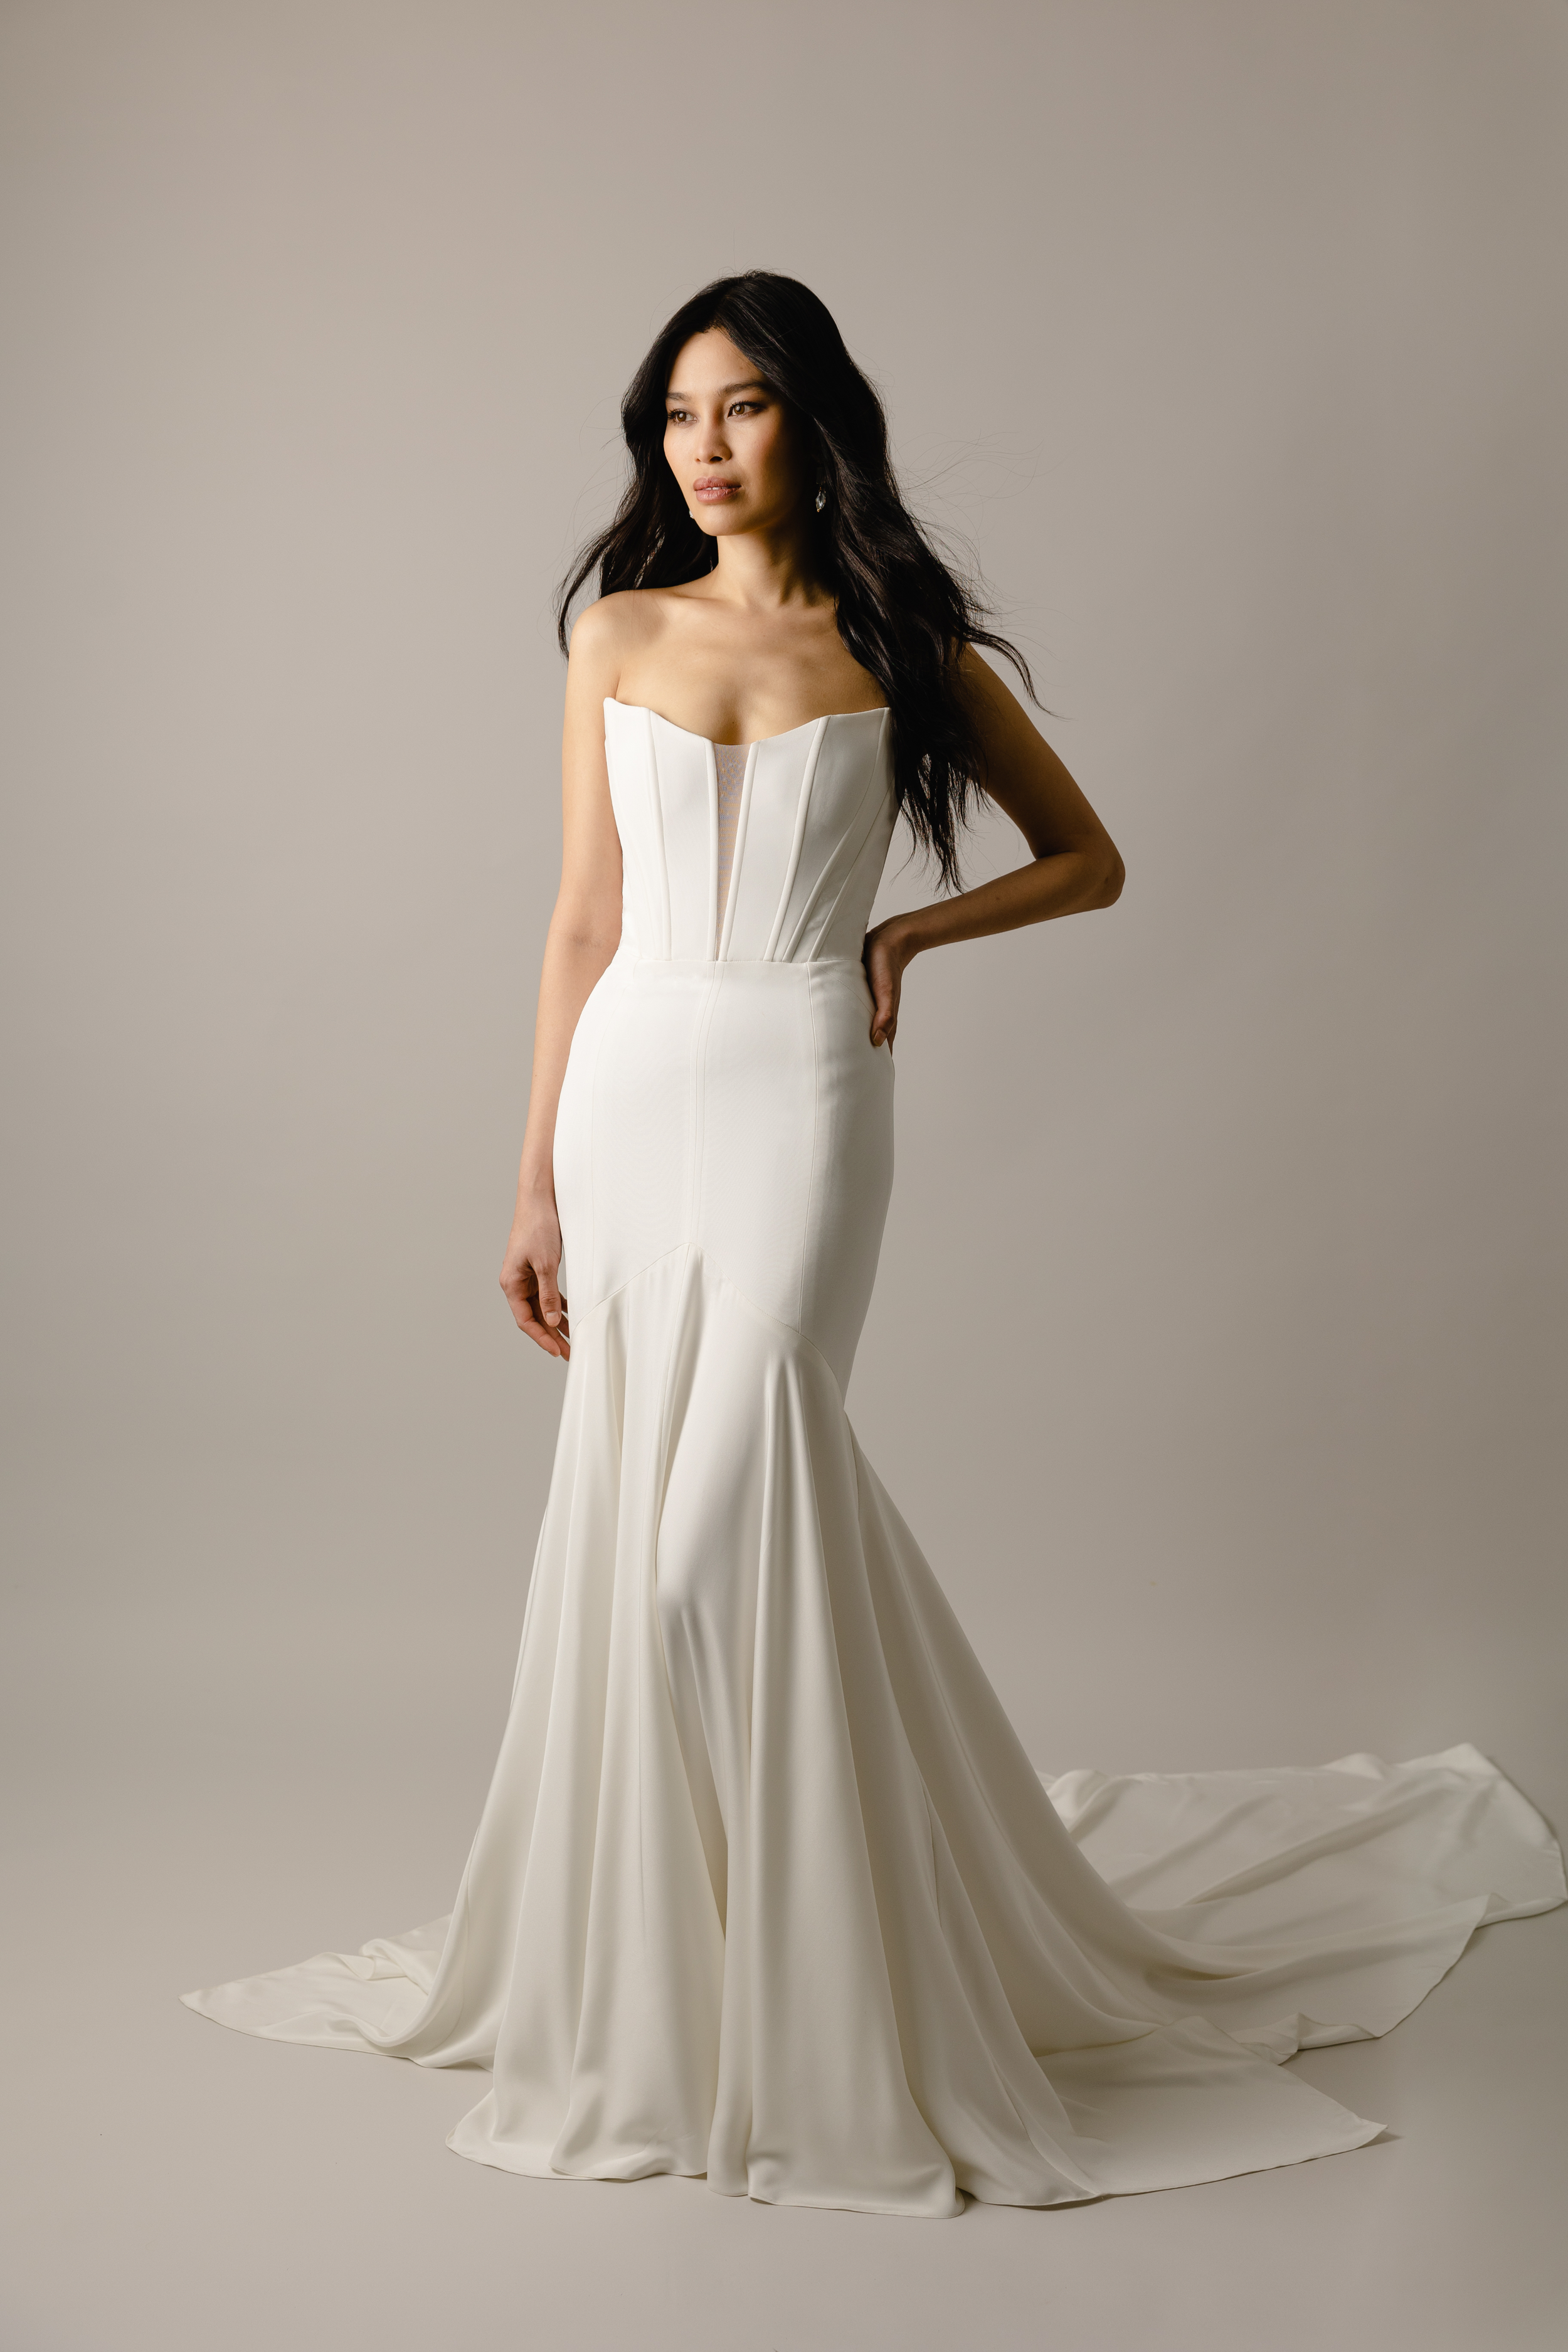 Sonoma crepe fit to flare wedding dress with cateye bodice1 web.png